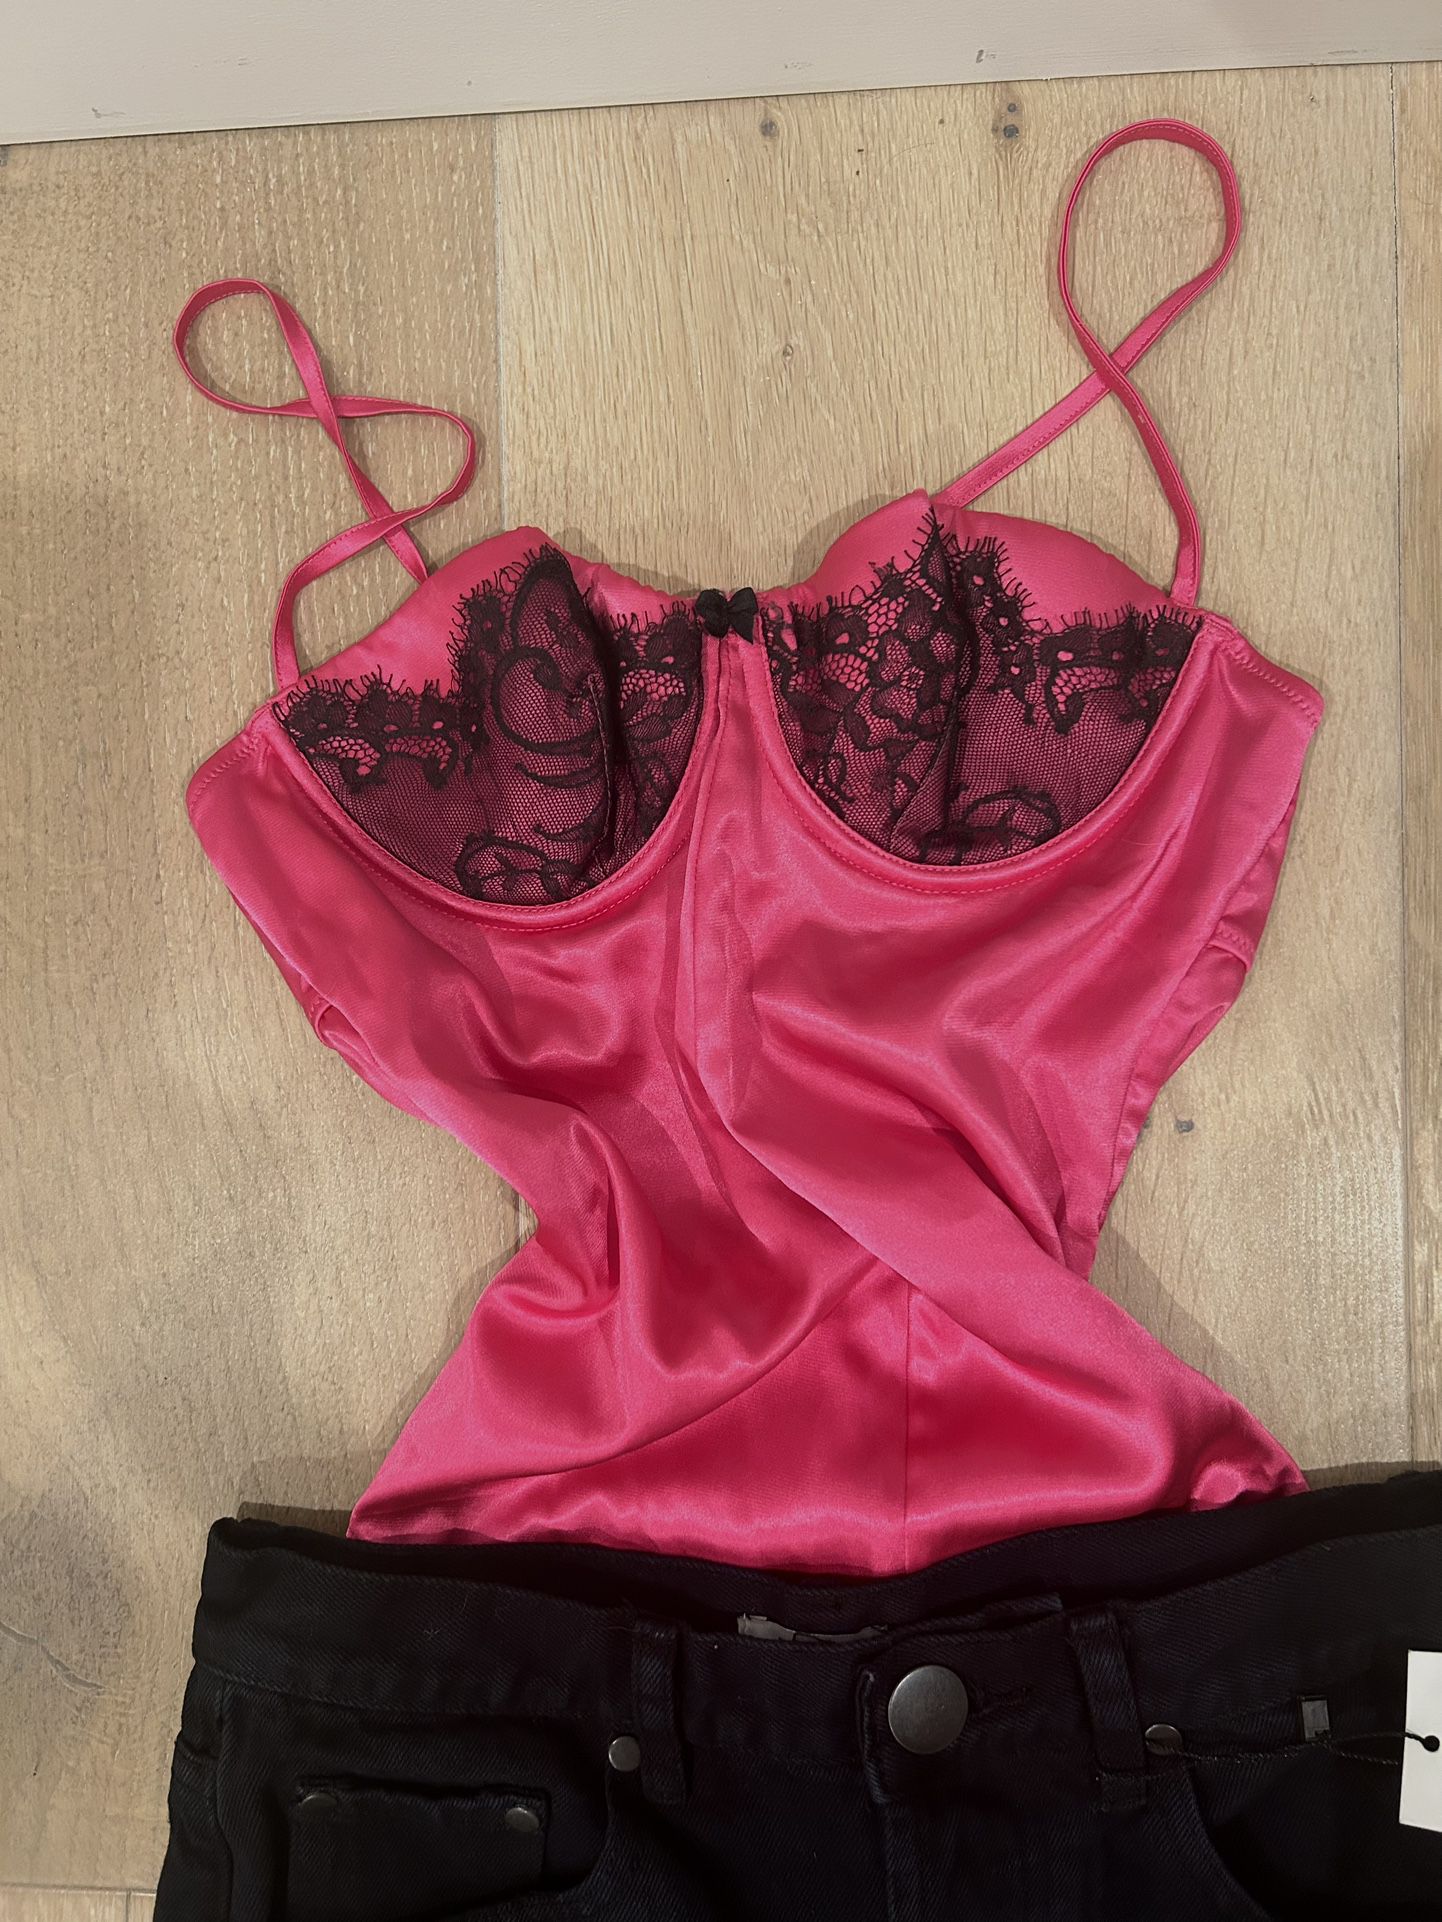 Vintage Pink Corset Top With Black Lace 32B